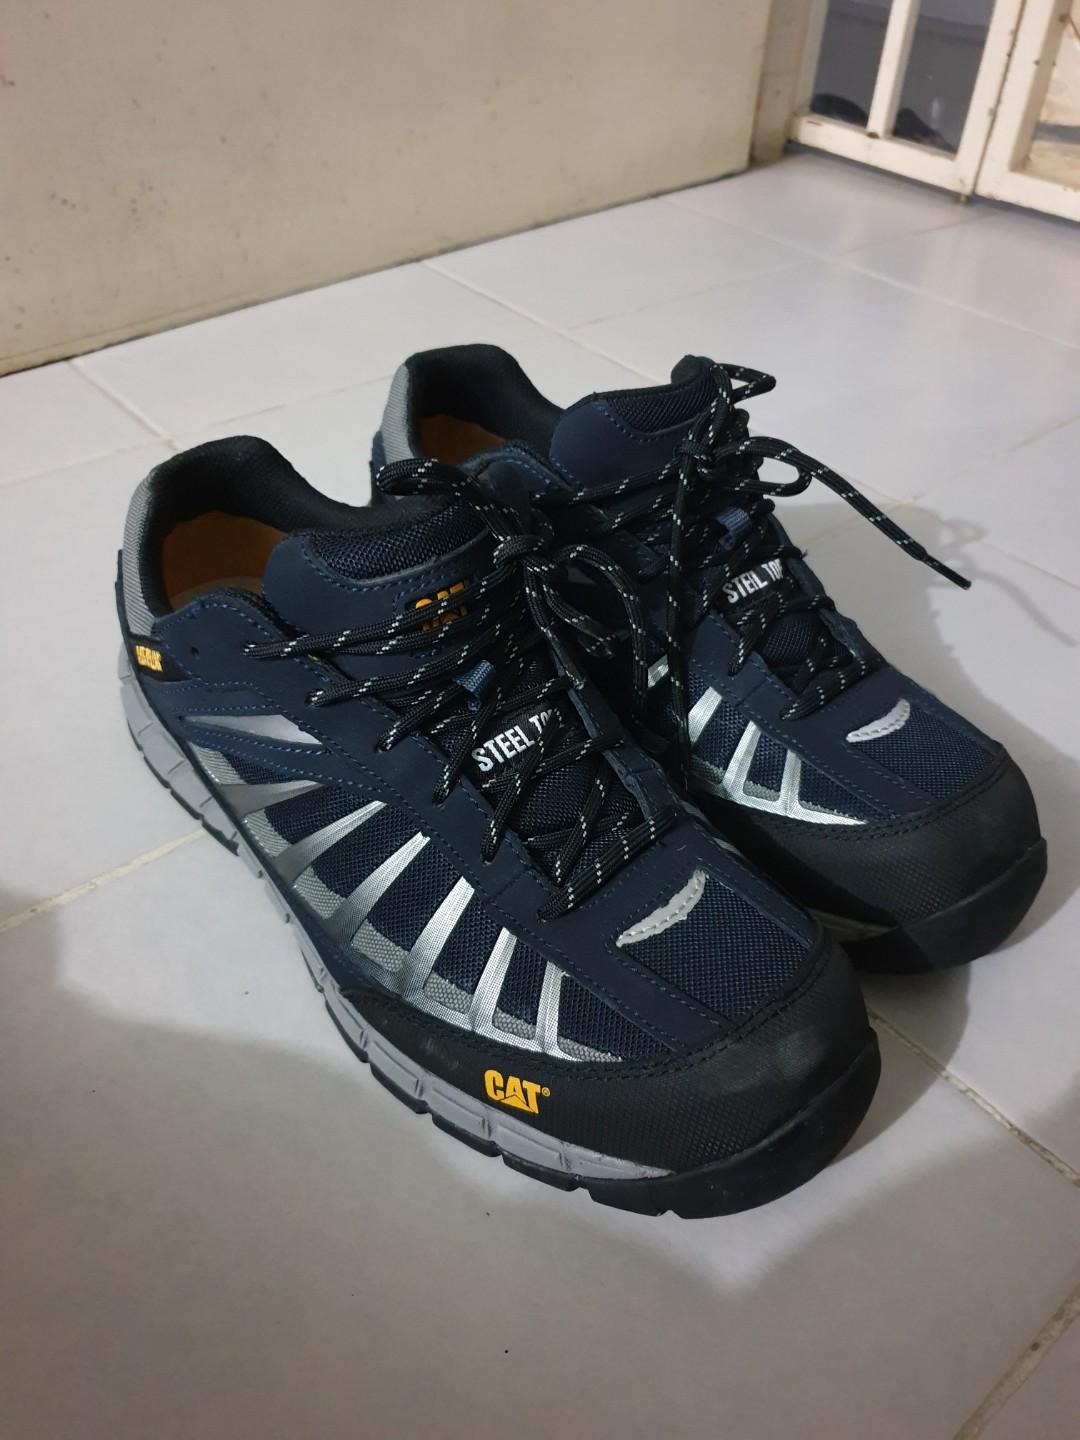 caterpillar mid trail shoes